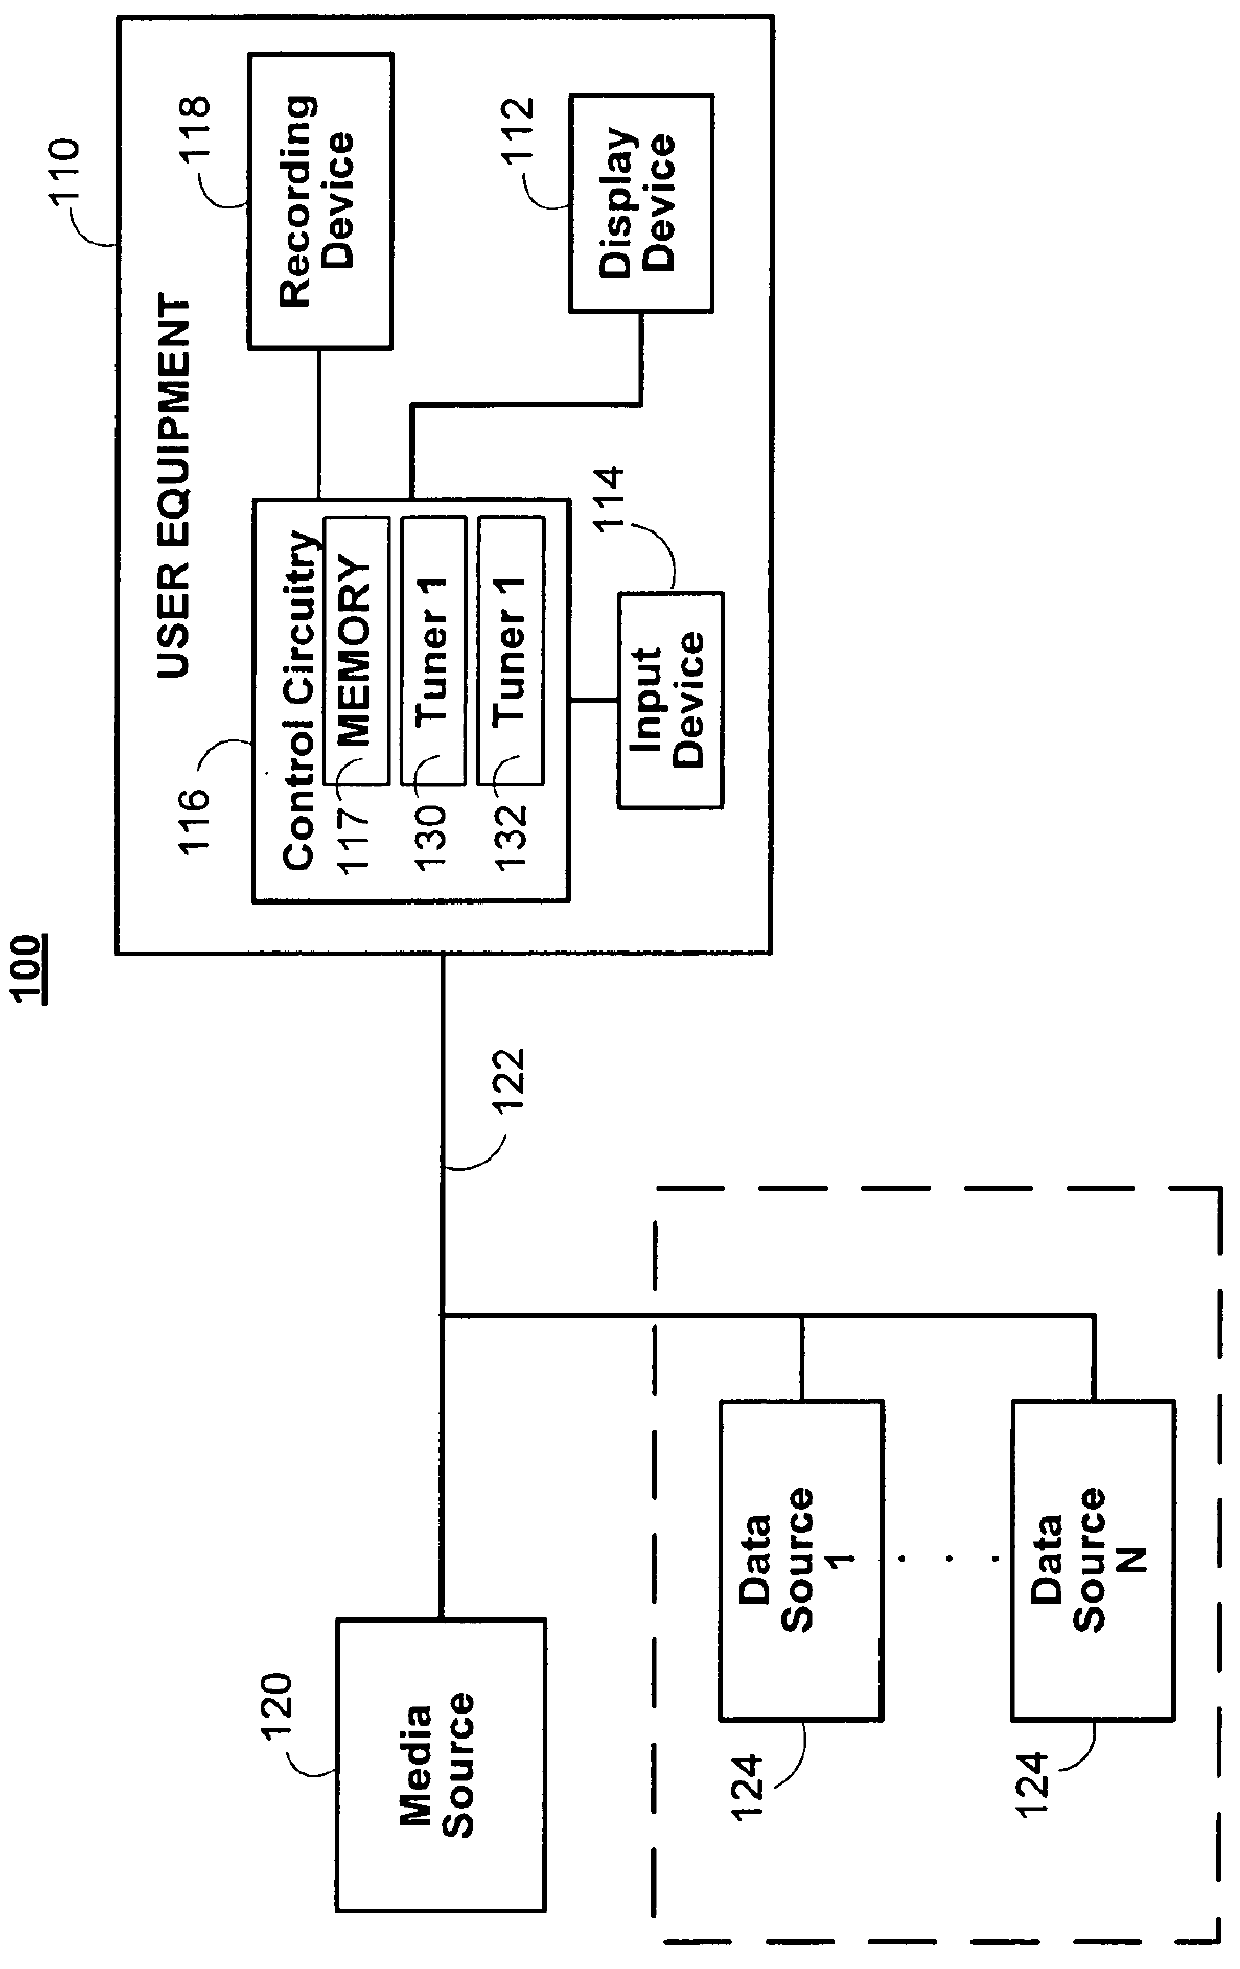 Systems and methods for providing a scan transport bar